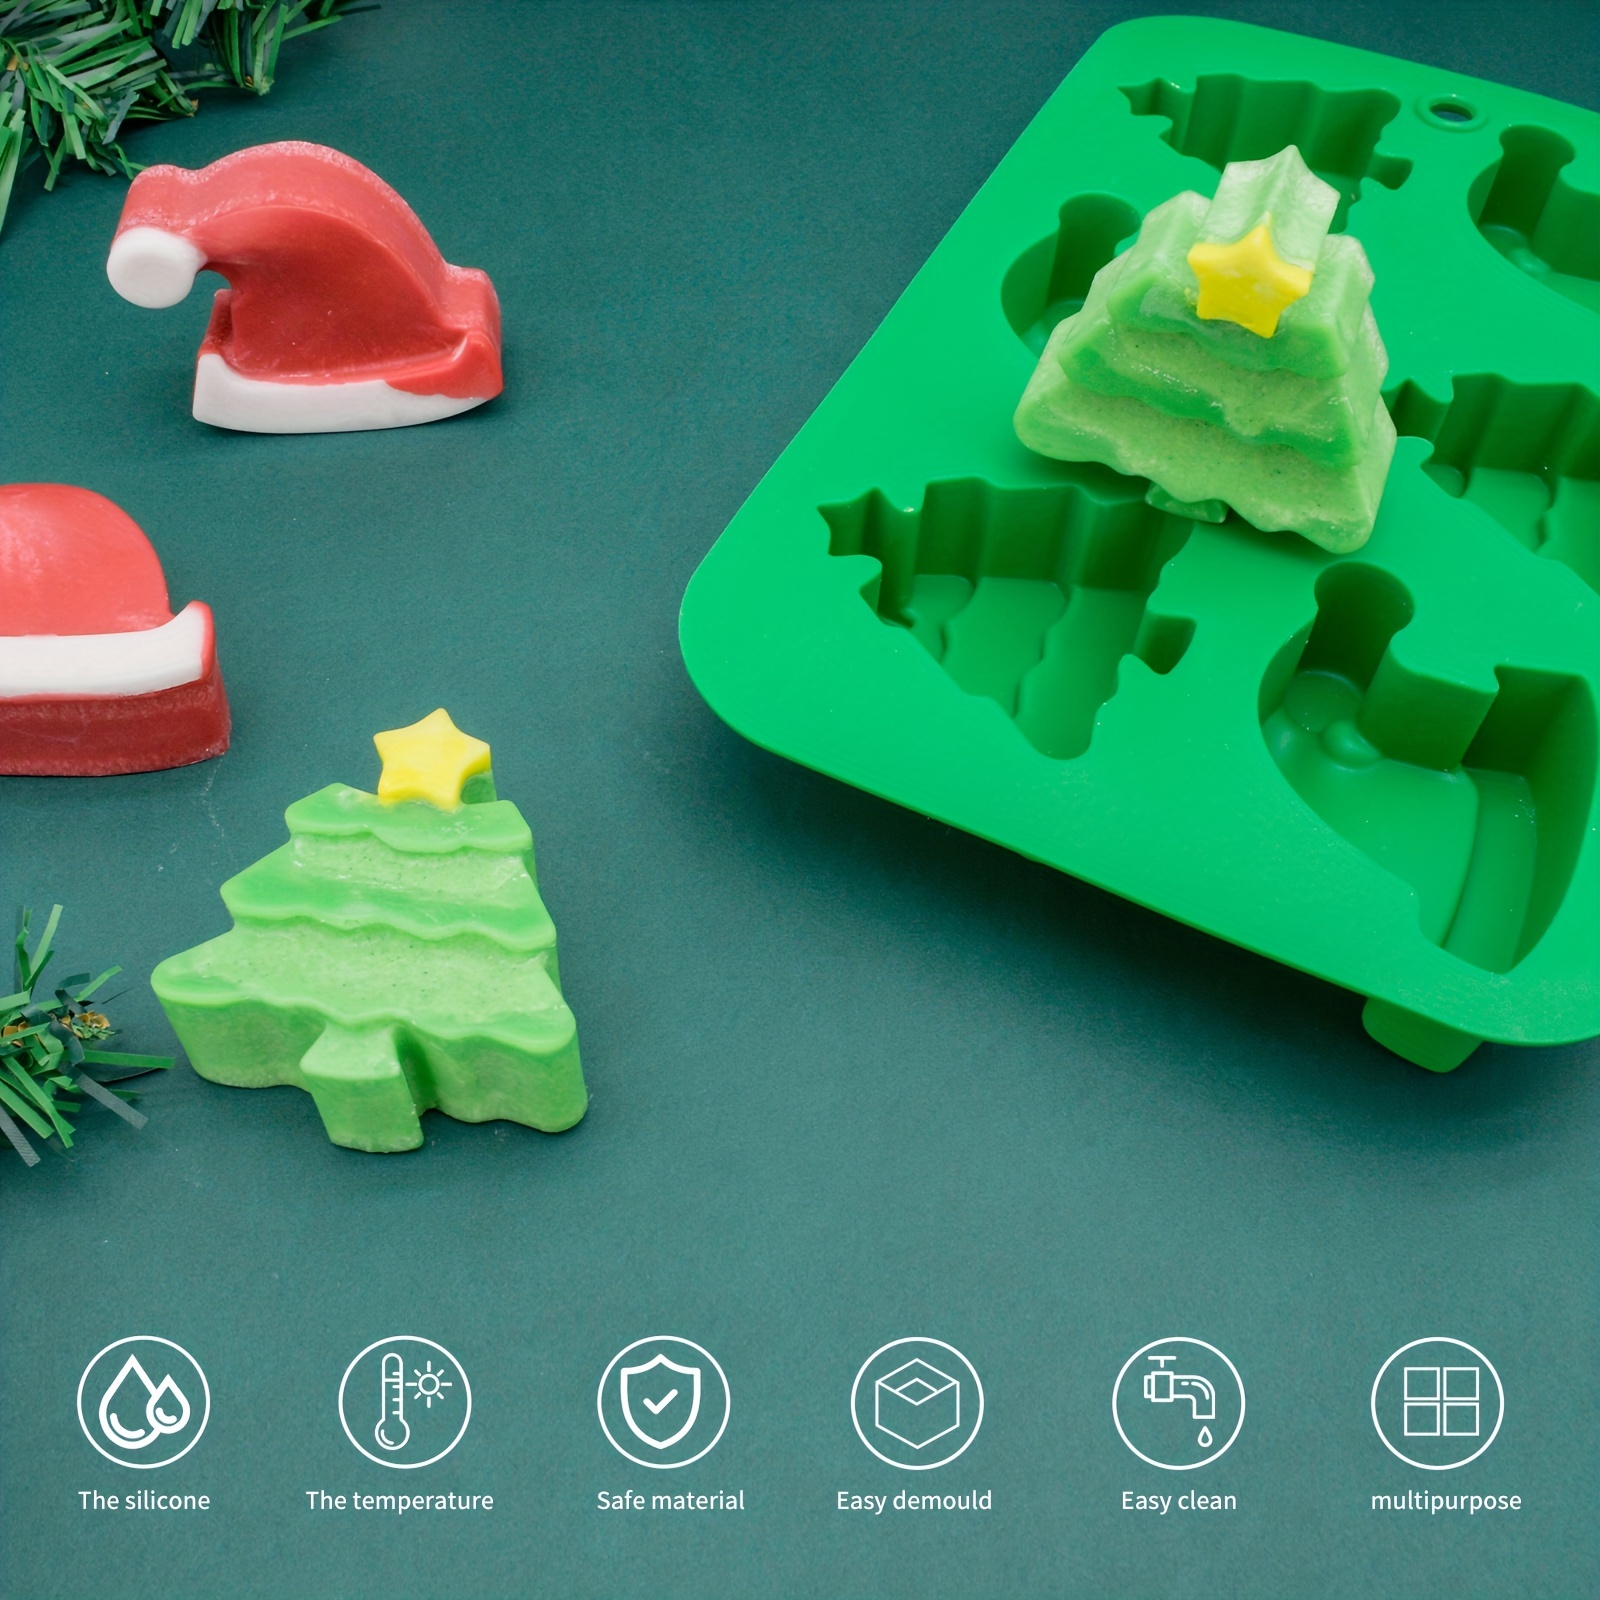  3D Christmas Tree Mold, 3D Silicone Christmas Baking Molds, Christmas  Tree Cake Pan, Christmas Tree Silicone Cake Mold Baking Tray, Christmas  Baking Pan Muffin Mold DIY Crafts: Home & Kitchen